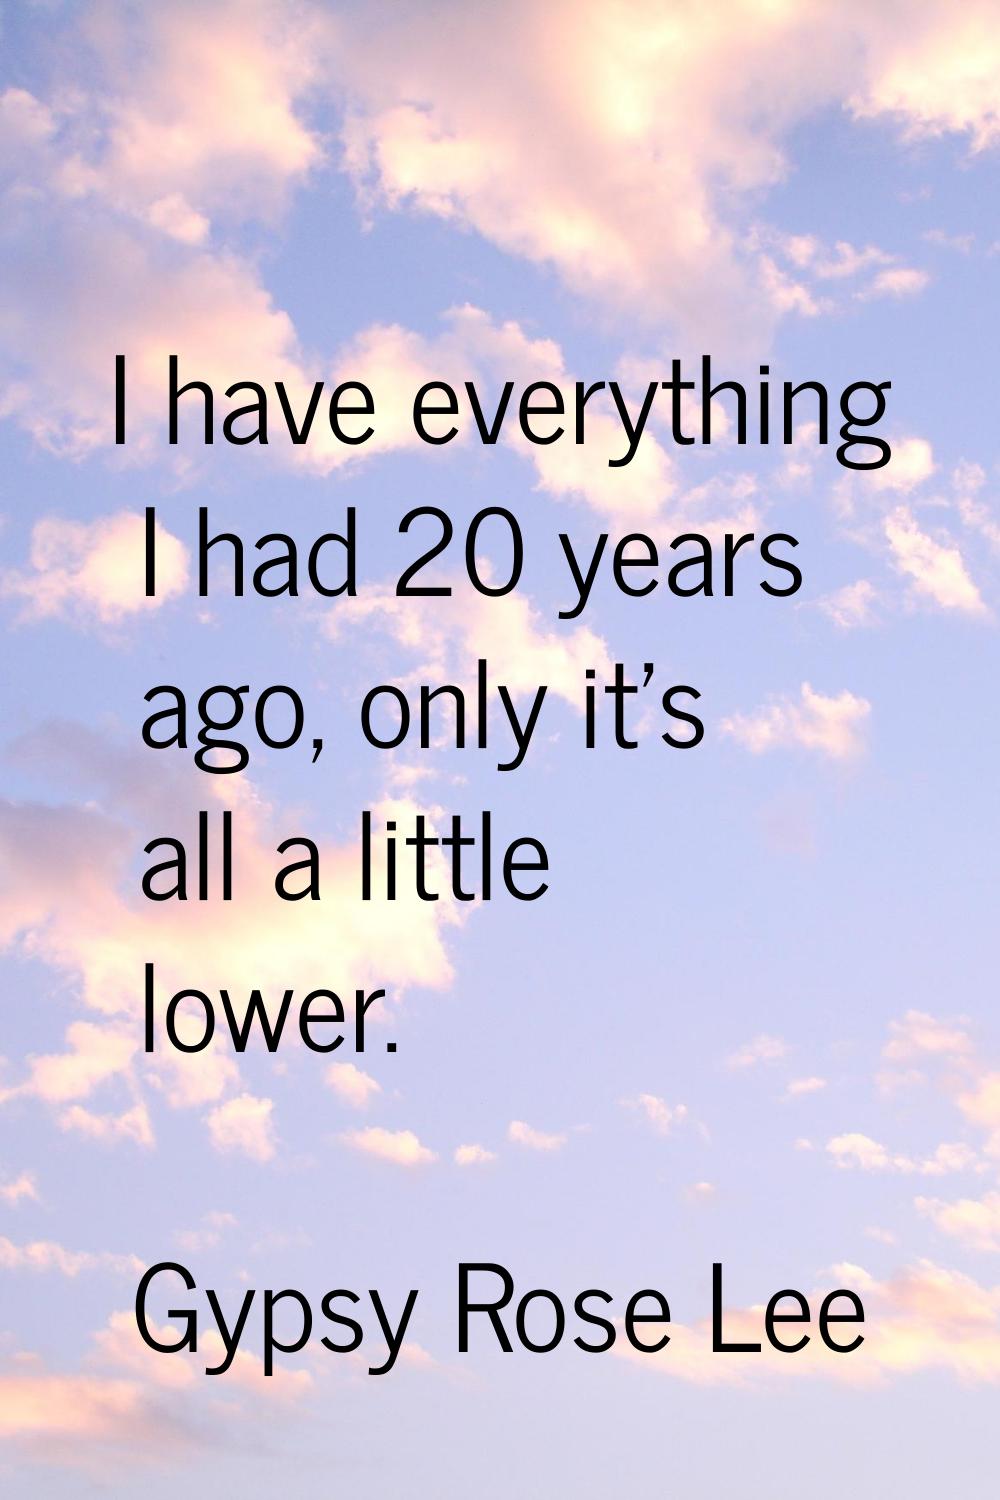 I have everything I had 20 years ago, only it's all a little lower.